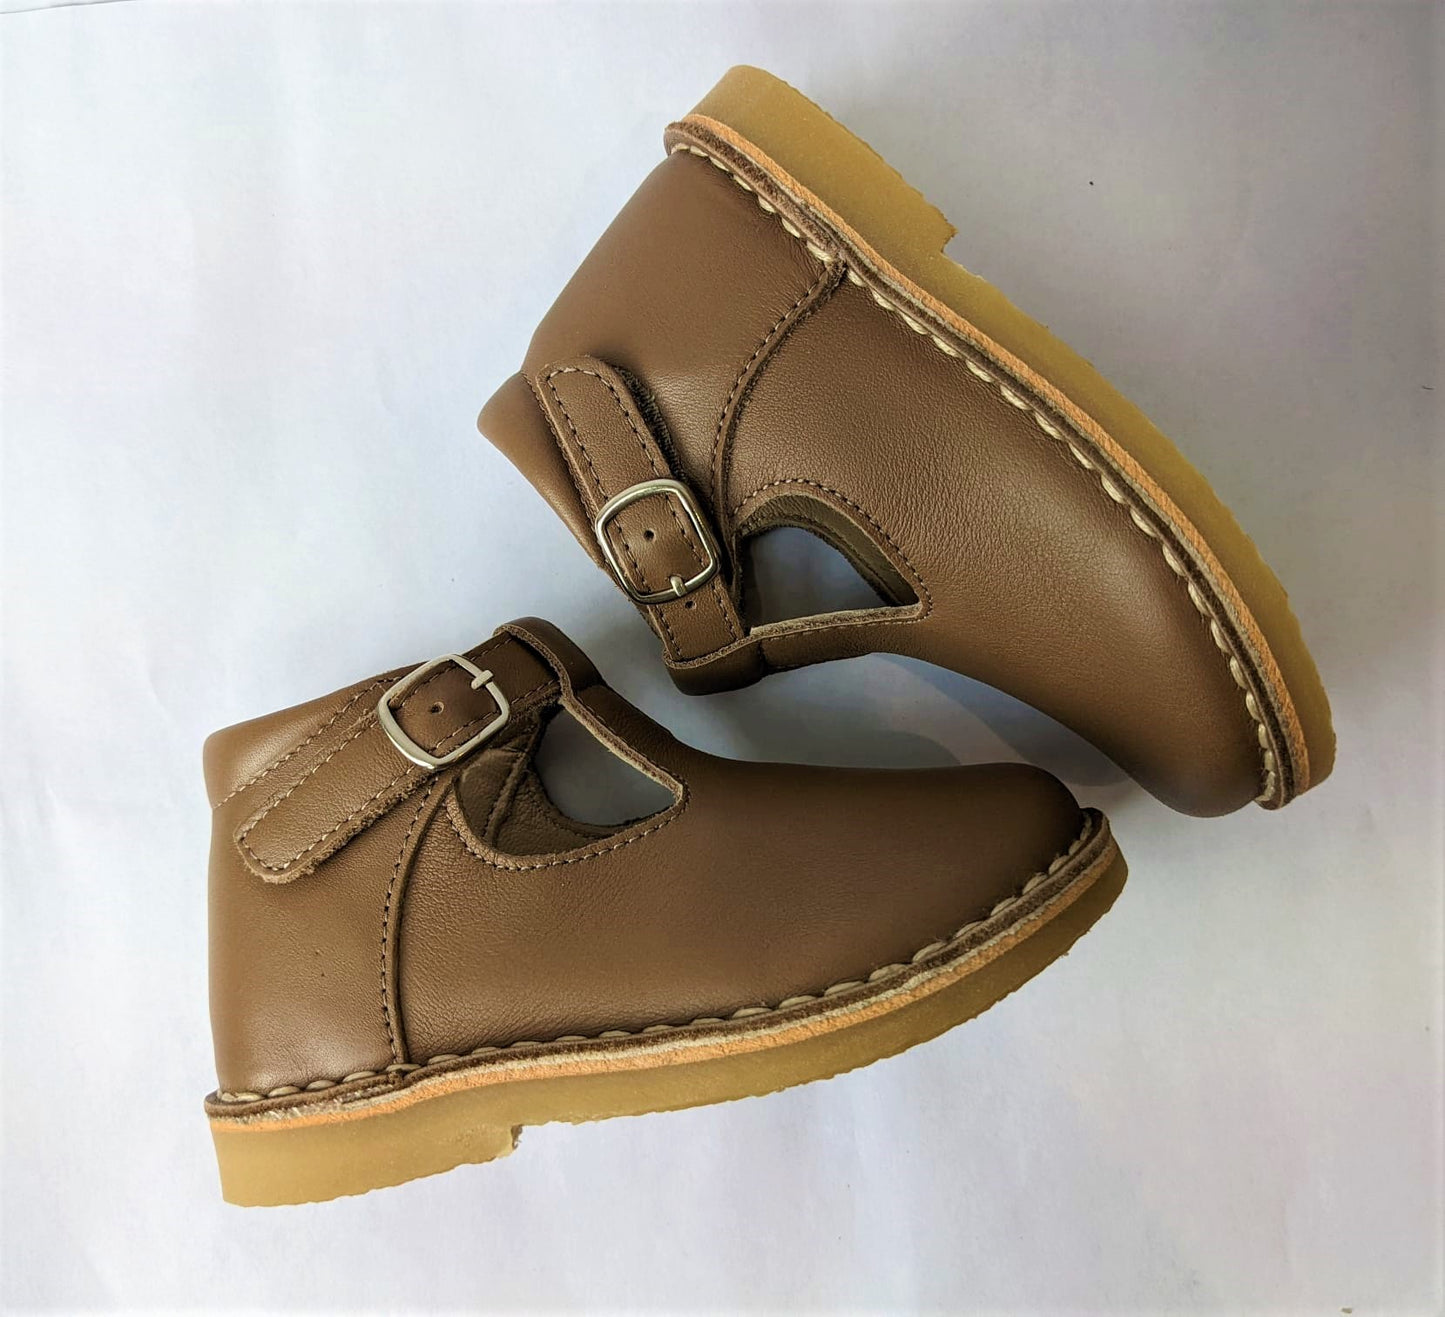 A girls T-Bar shoe by Petasil, style Cooper, in light brown with faux buckle fastening. Top view of a pair.